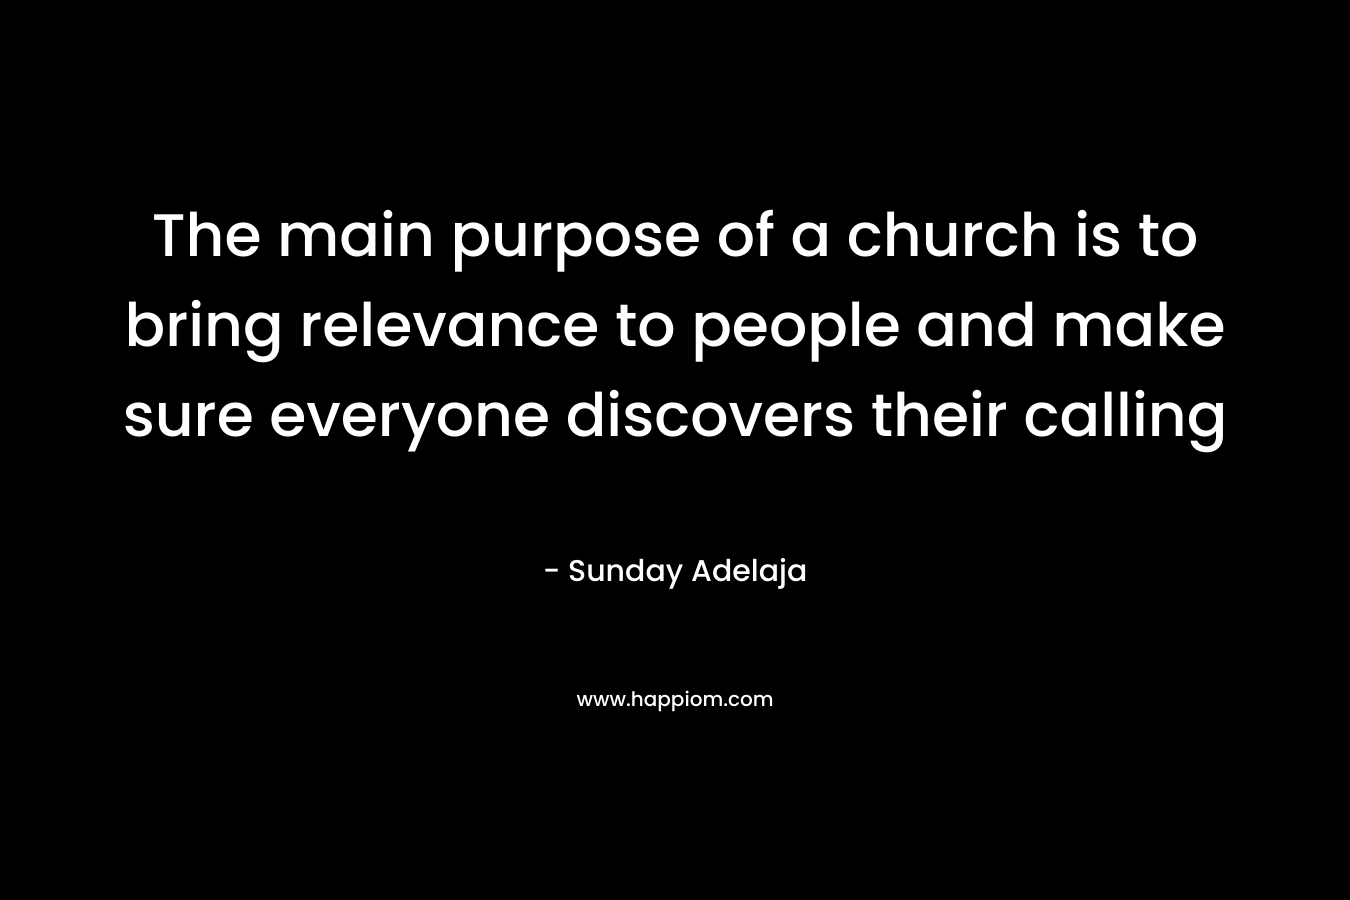 The main purpose of a church is to bring relevance to people and make sure everyone discovers their calling – Sunday Adelaja